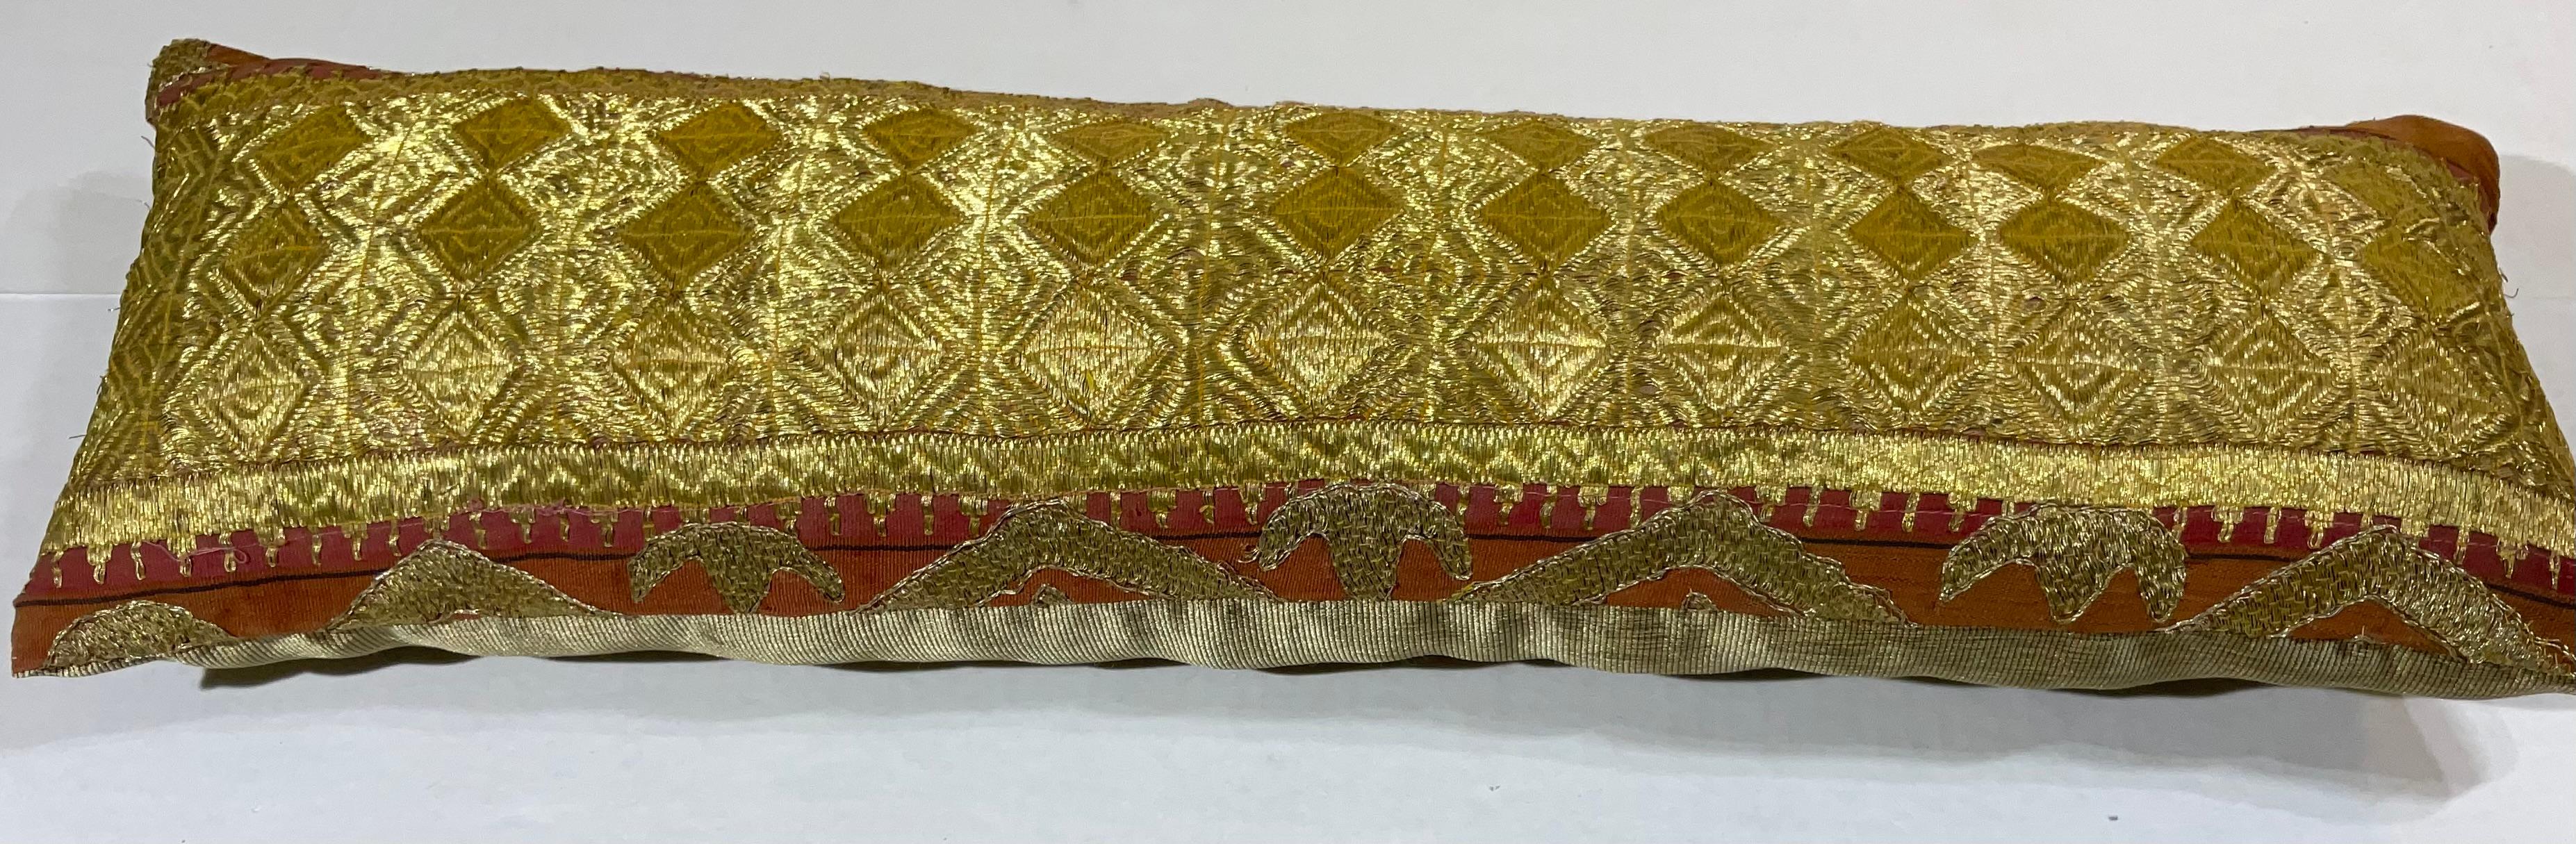 Single Antique Embroidery Textile Pillow For Sale 2